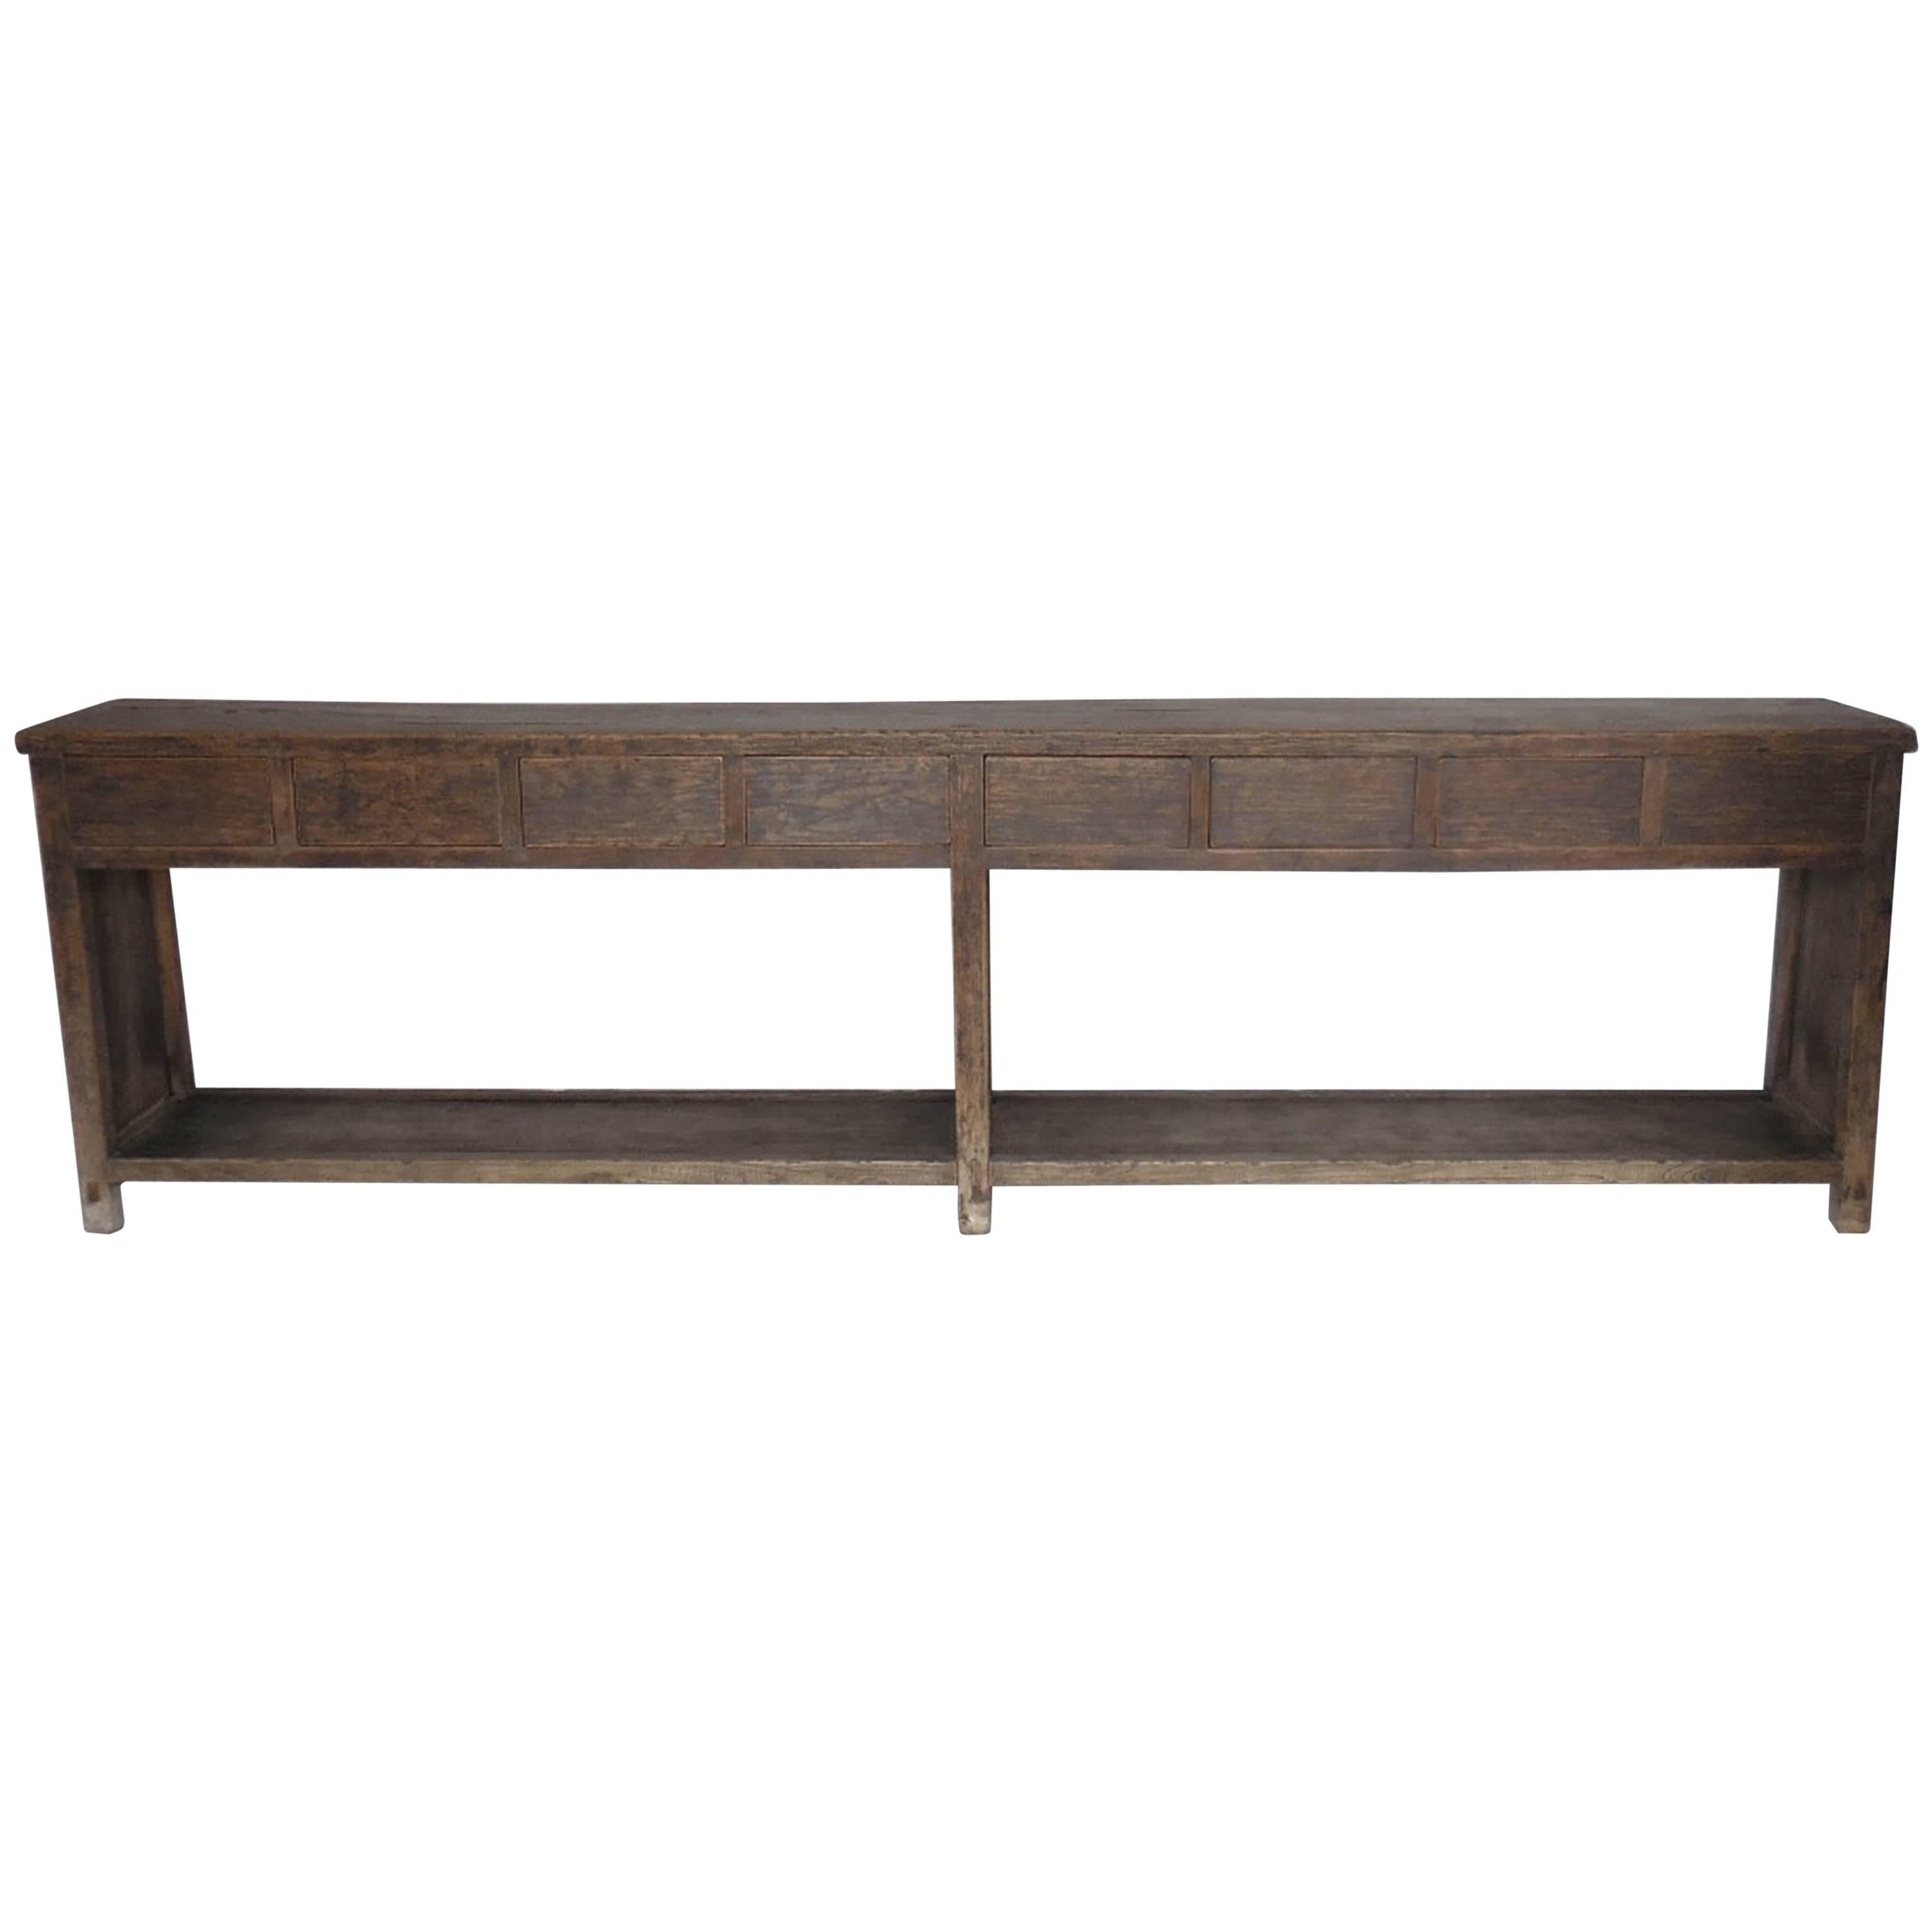 19th Century Very Long Elm Console with Drawers